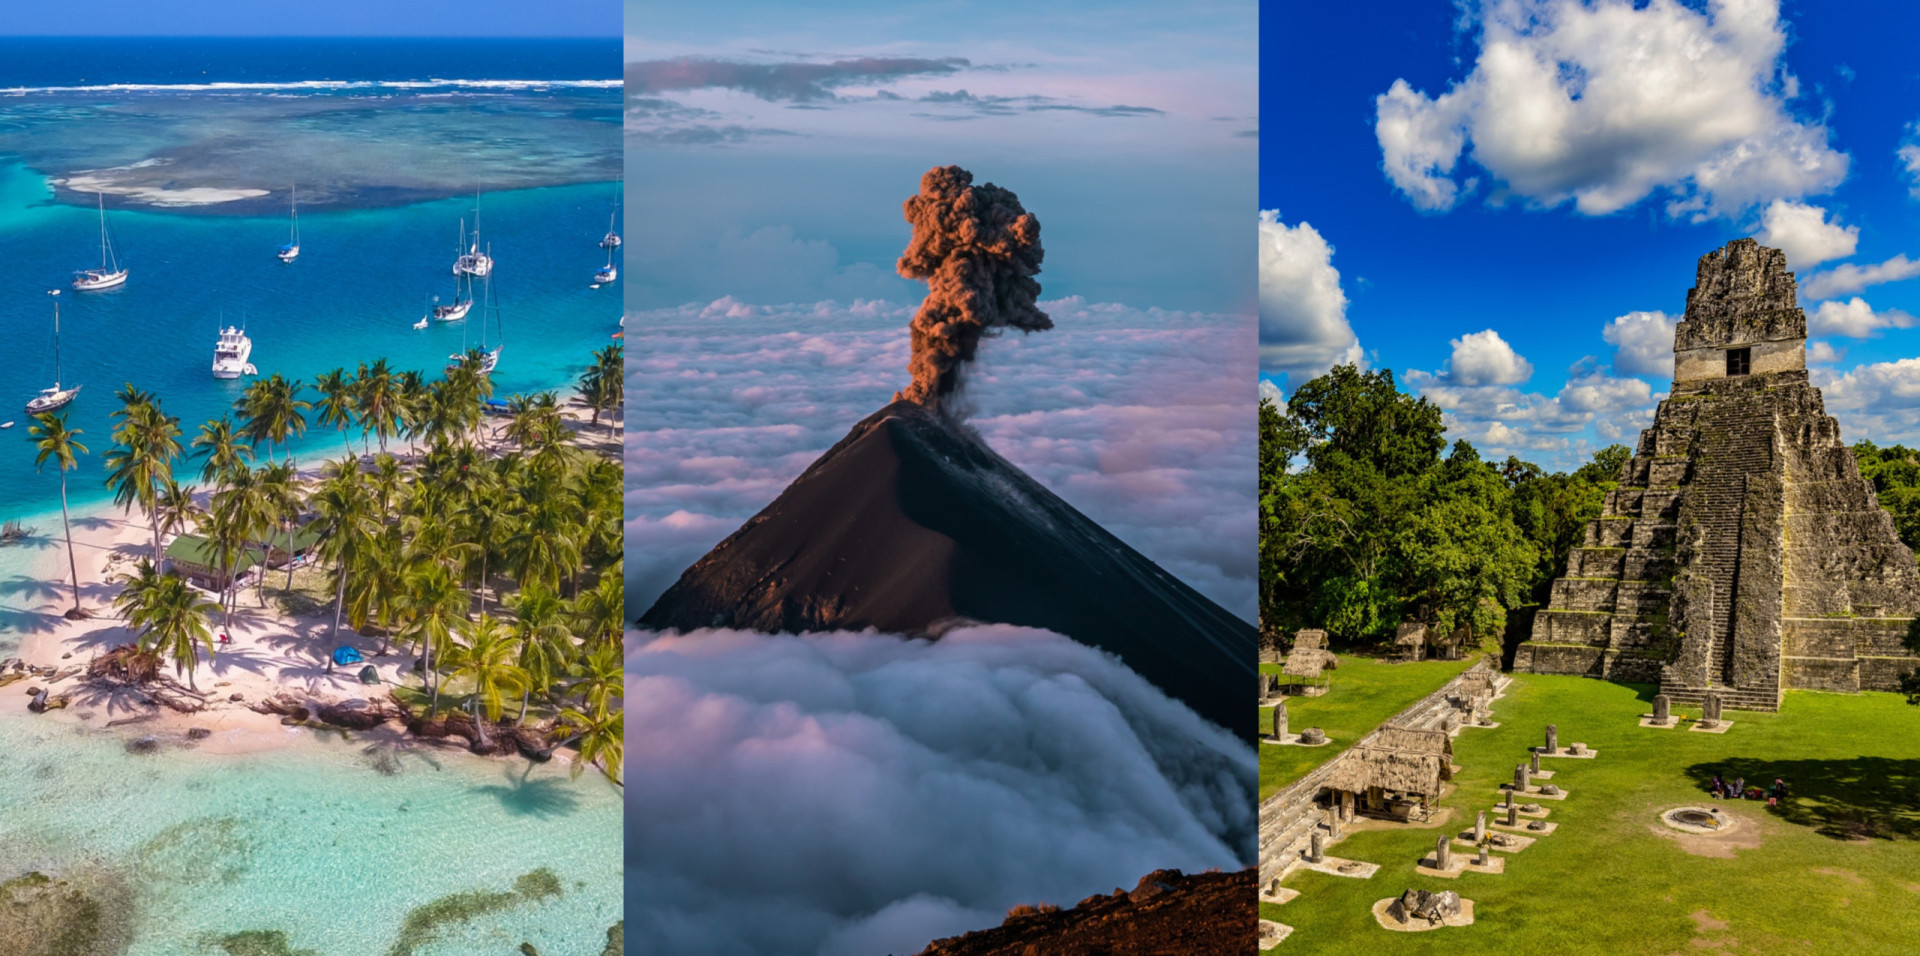 <p>Central America is generally regarded as being composed of seven countries—Guatemala, Belize, Costa Rica, El Salvador, Honduras, Panama, and Nicaragua. That's seven wonderfully compelling vacation destination options famed for stunningly varied <a href="https://www.starsinsider.com/travel/305621/be-amazed-by-these-stunning-jungle-and-rainforest-destinations" rel="noopener">ecosystems</a>, culturally significant historic ruins, and some of the best beaches around. But where do you start?</p> <p>If this part of the world is on your must-see bucket list, click through this gallery for ideas on where to go and what to see!</p><p>You may also like:<a href="https://www.starsinsider.com/n/114291?utm_source=msn.com&utm_medium=display&utm_campaign=referral_description&utm_content=627756en-us"> The hottest and coldest places on the planet</a></p>